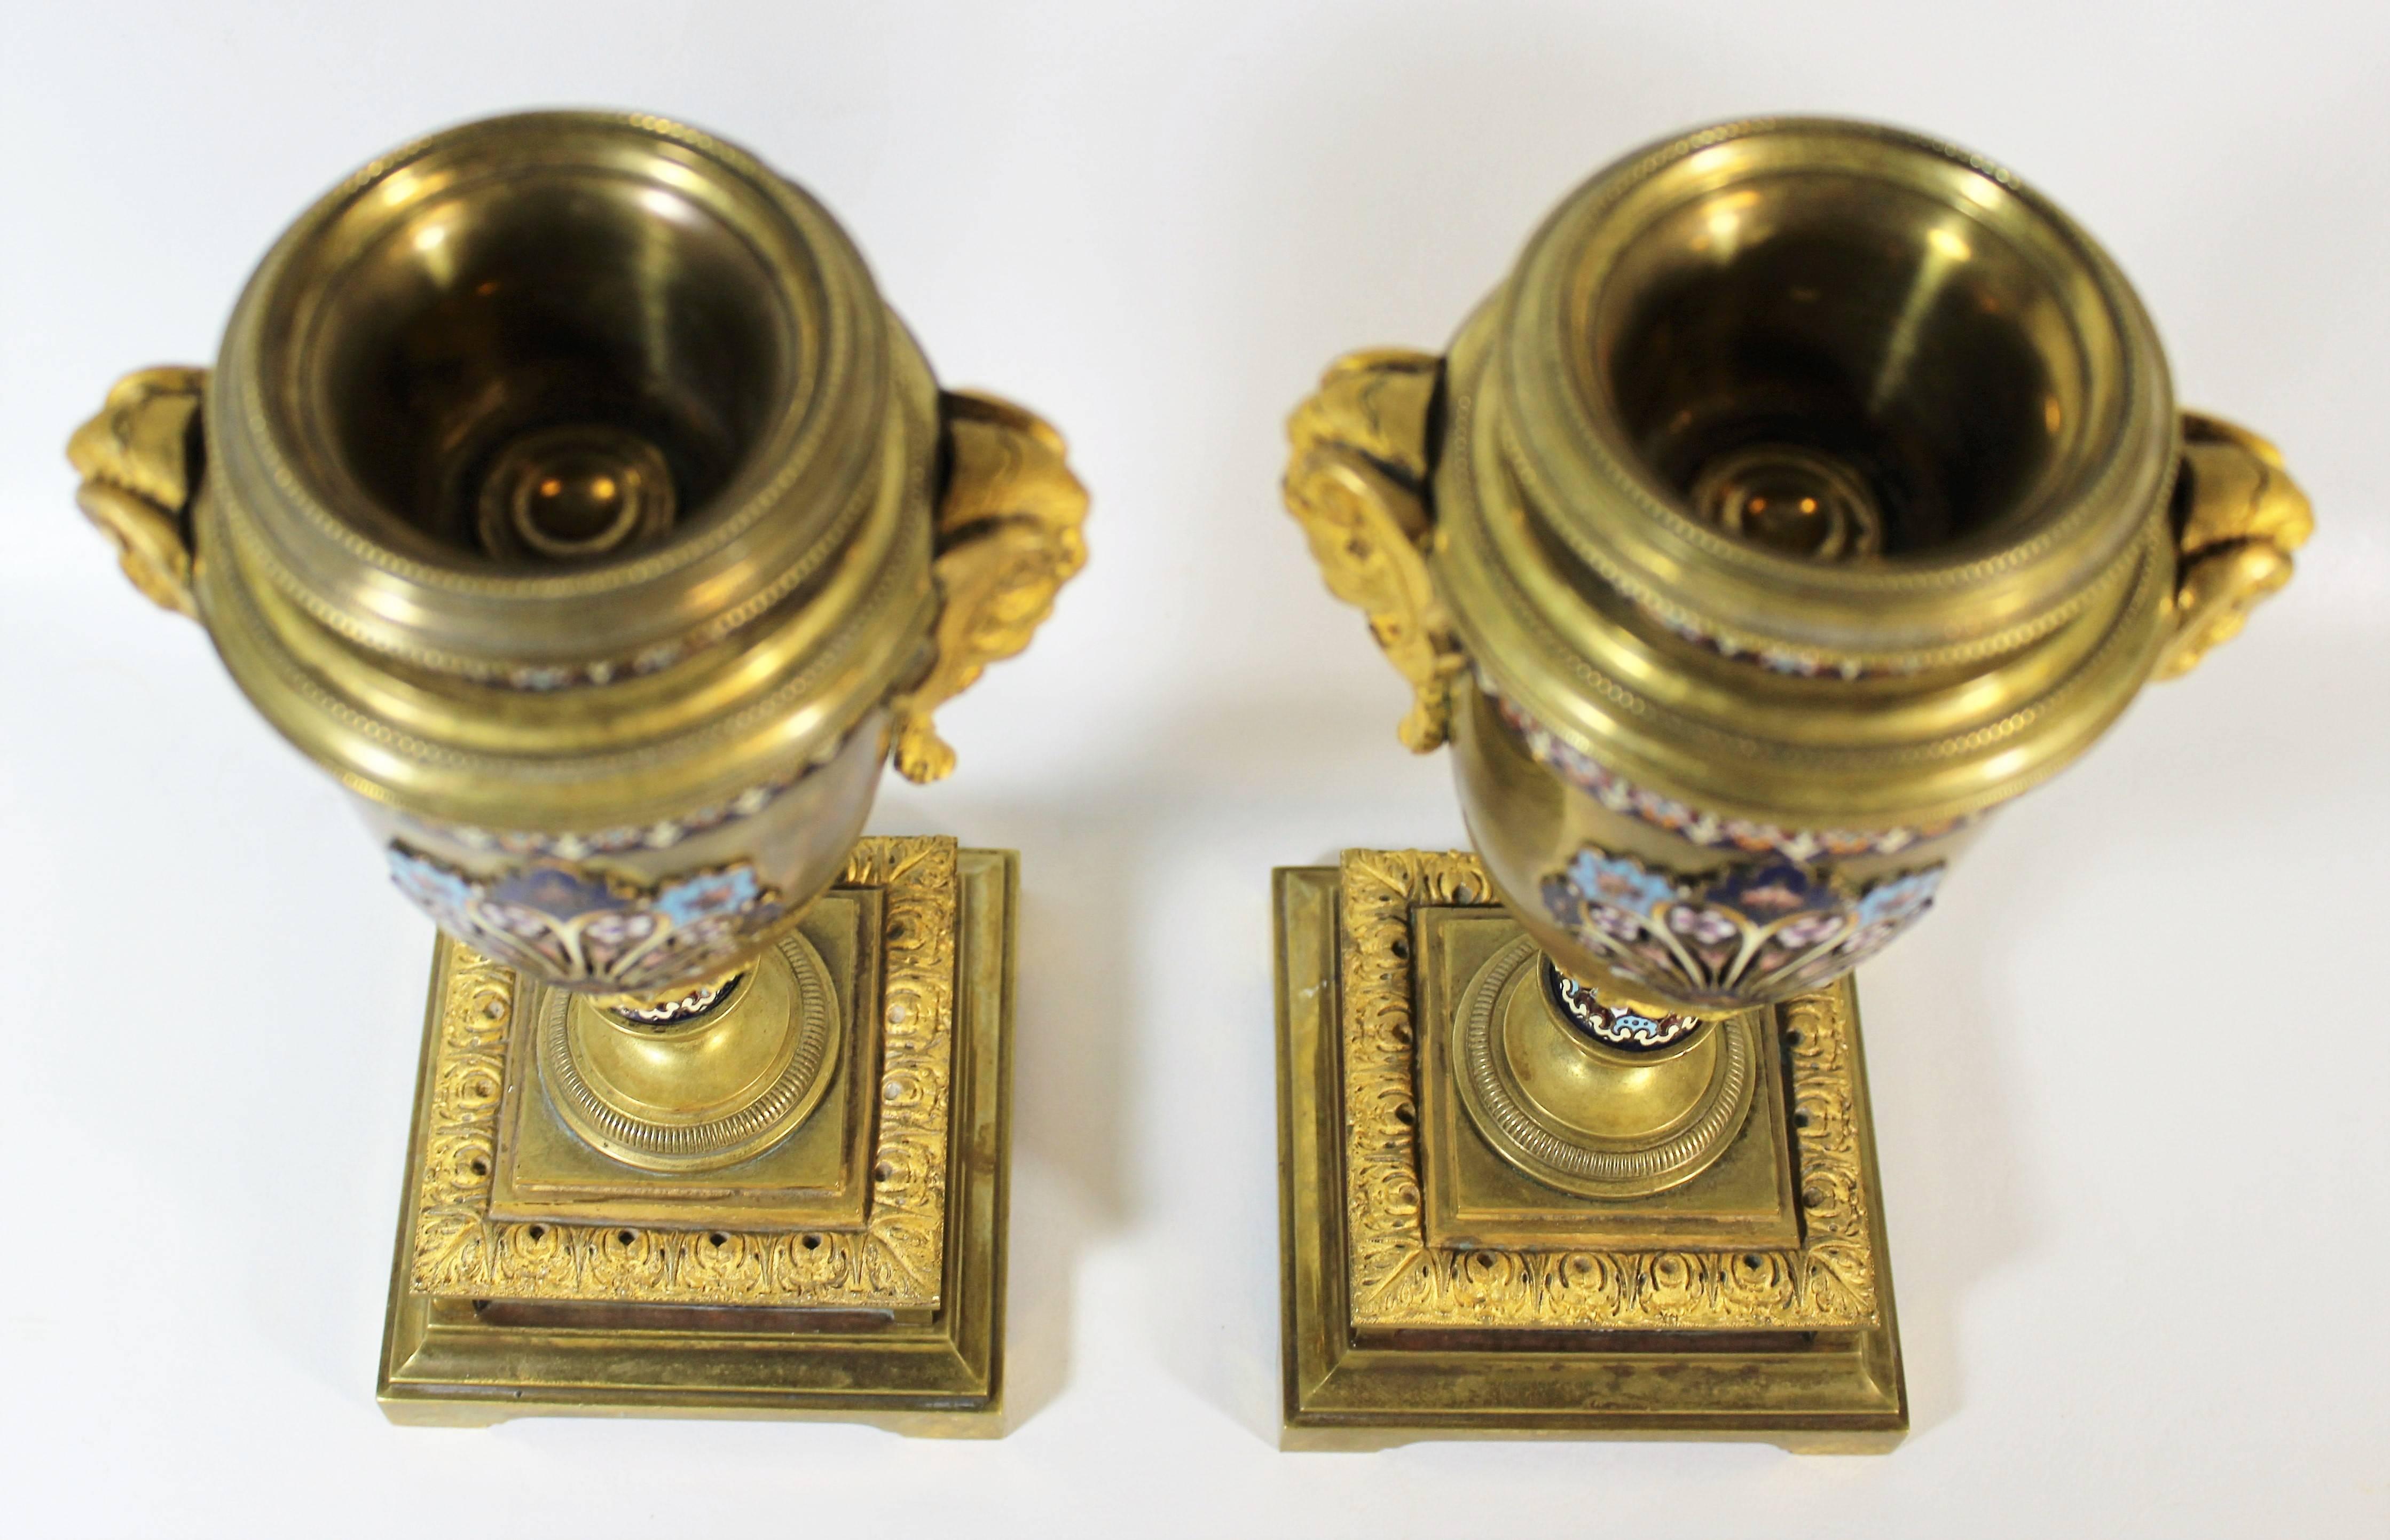  Pair of 19th Century French Gilt Bronze and Champleve Enamel Urns For Sale 3